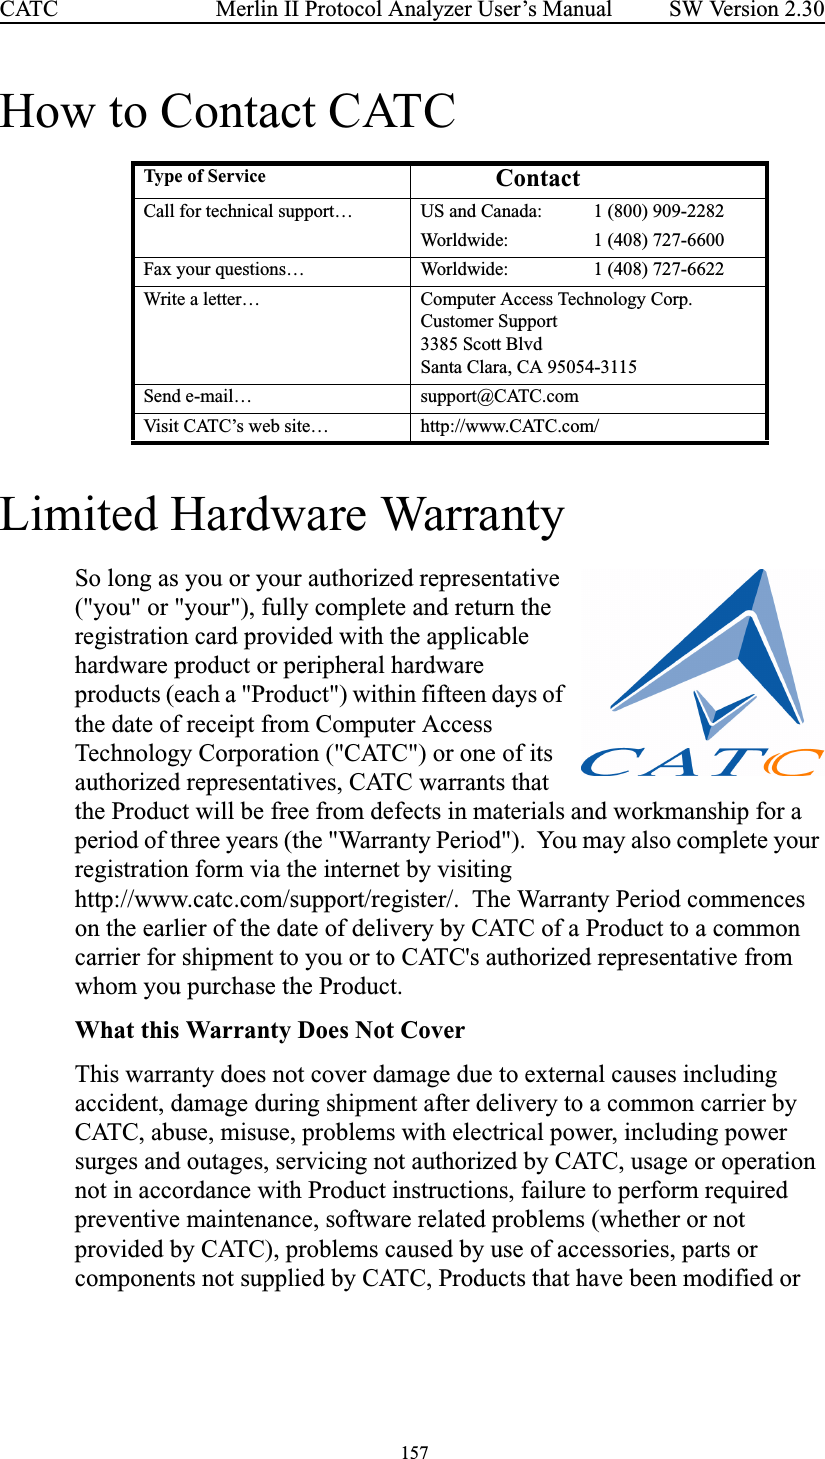  157 Merlin II Protocol Analyzer User’s ManualCATC SW Version 2.30How to Contact CATCLimited Hardware WarrantySo long as you or your authorized representative (&quot;you&quot; or &quot;your&quot;), fully complete and return the registration card provided with the applicable hardware product or peripheral hardware products (each a &quot;Product&quot;) within fifteen days of the date of receipt from Computer Access Technology Corporation (&quot;CATC&quot;) or one of its authorized representatives, CATC warrants that the Product will be free from defects in materials and workmanship for a period of three years (the &quot;Warranty Period&quot;).  You may also complete your registration form via the internet by visiting http://www.catc.com/support/register/.  The Warranty Period commences on the earlier of the date of delivery by CATC of a Product to a common carrier for shipment to you or to CATC&apos;s authorized representative from whom you purchase the Product.What this Warranty Does Not CoverThis warranty does not cover damage due to external causes including accident, damage during shipment after delivery to a common carrier by CATC, abuse, misuse, problems with electrical power, including power surges and outages, servicing not authorized by CATC, usage or operation not in accordance with Product instructions, failure to perform required preventive maintenance, software related problems (whether or not provided by CATC), problems caused by use of accessories, parts or components not supplied by CATC, Products that have been modified or Type of Ser vice ContactCall for technical support… US and Canada: 1 (800) 909-2282Worldwide: 1 (408) 727-6600Fax your questions… Worldwide: 1 (408) 727-6622Write a letter… Computer Access Technology Corp.Customer Support3385 Scott BlvdSanta Clara, CA 95054-3115Send e-mail… support@CATC.comVisit CATC’s web site… http://www.CATC.com/